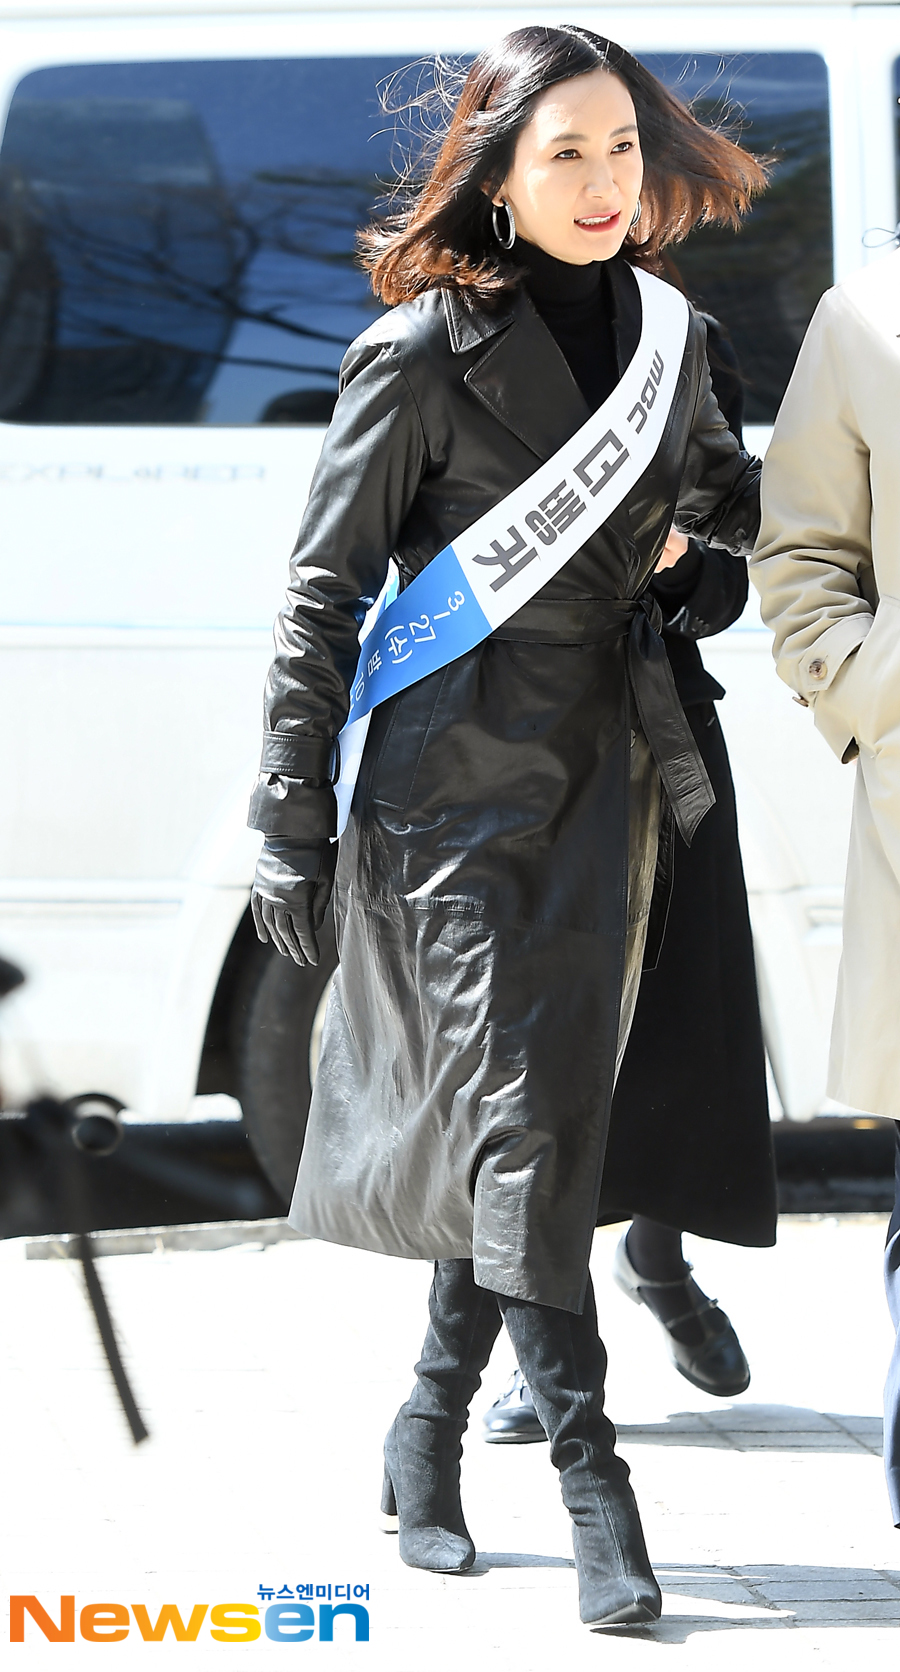 MBCs new tree drama The Bankers first radiographer sales event was held near Yeouido Station in Yeongdeungpo-gu, Seoul on March 13 at 12 p.m.Chae Shi-ra Kim Sang-joong is attending the day.The Banker, starring Kim Sang-joong, Chae Shi-ra, An Woo-yeon, Shin Do-hyun and Cha In-ha, is unexpectedly promoted to the audit of the head office by Kim Sang-joong, the head of the Korea Banks waiting branch, and comes to a financial office investigation drama that explores corruption cases in the organization with the  It will be broadcast first on 27th.Jung Yu-jin